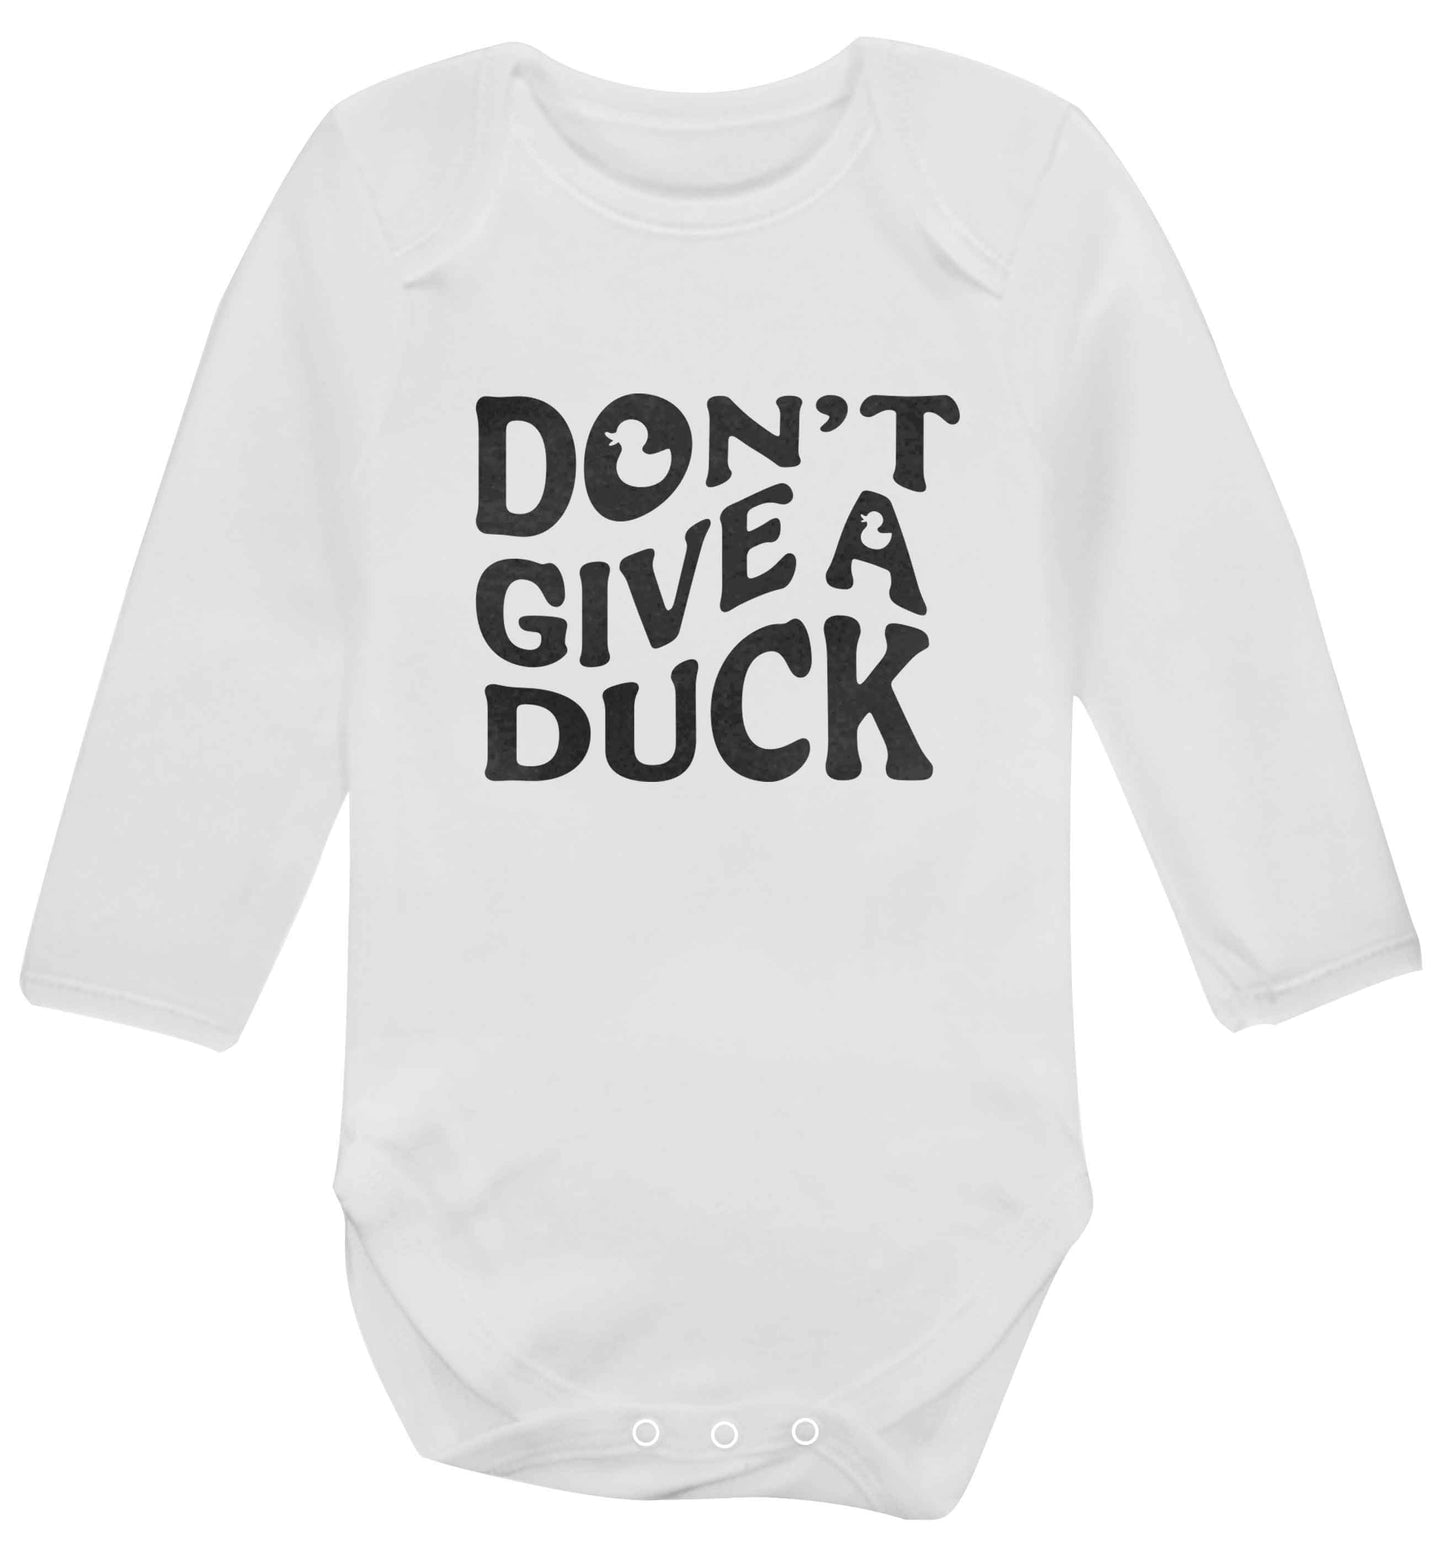 Don't give a duck baby vest long sleeved white 6-12 months